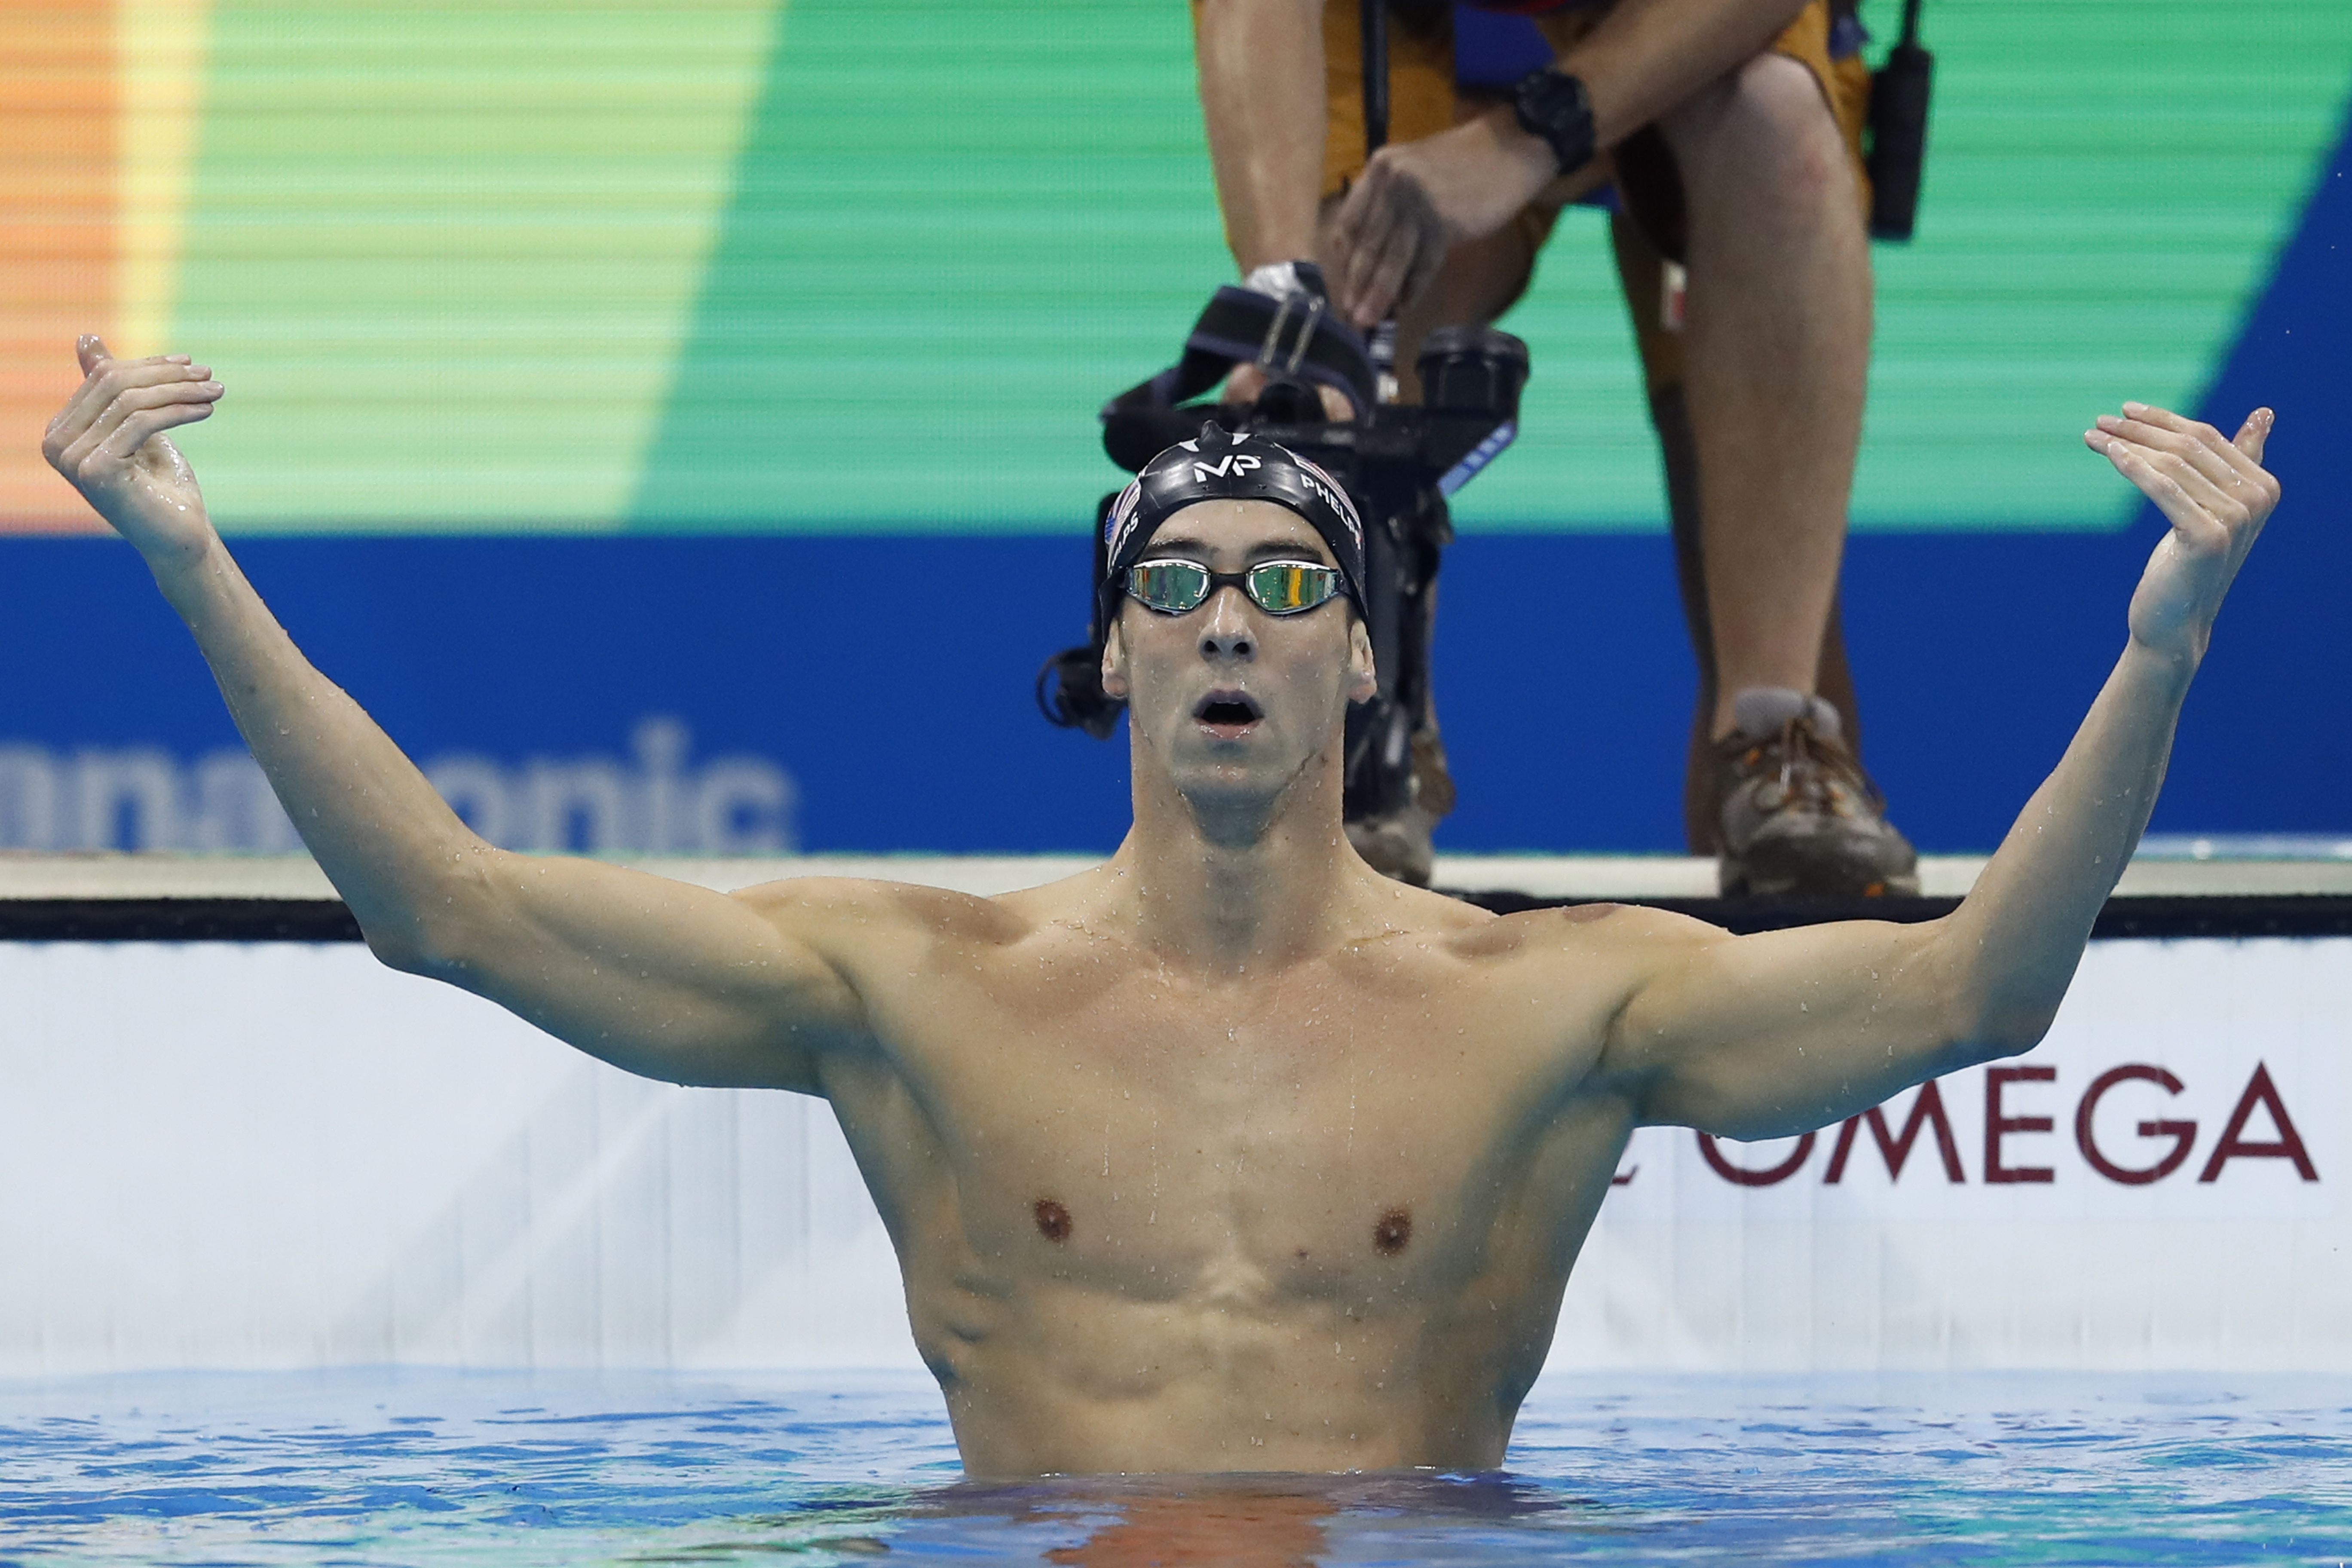 Michael Phelps say his Phelps face death glare wasn’t directed at le